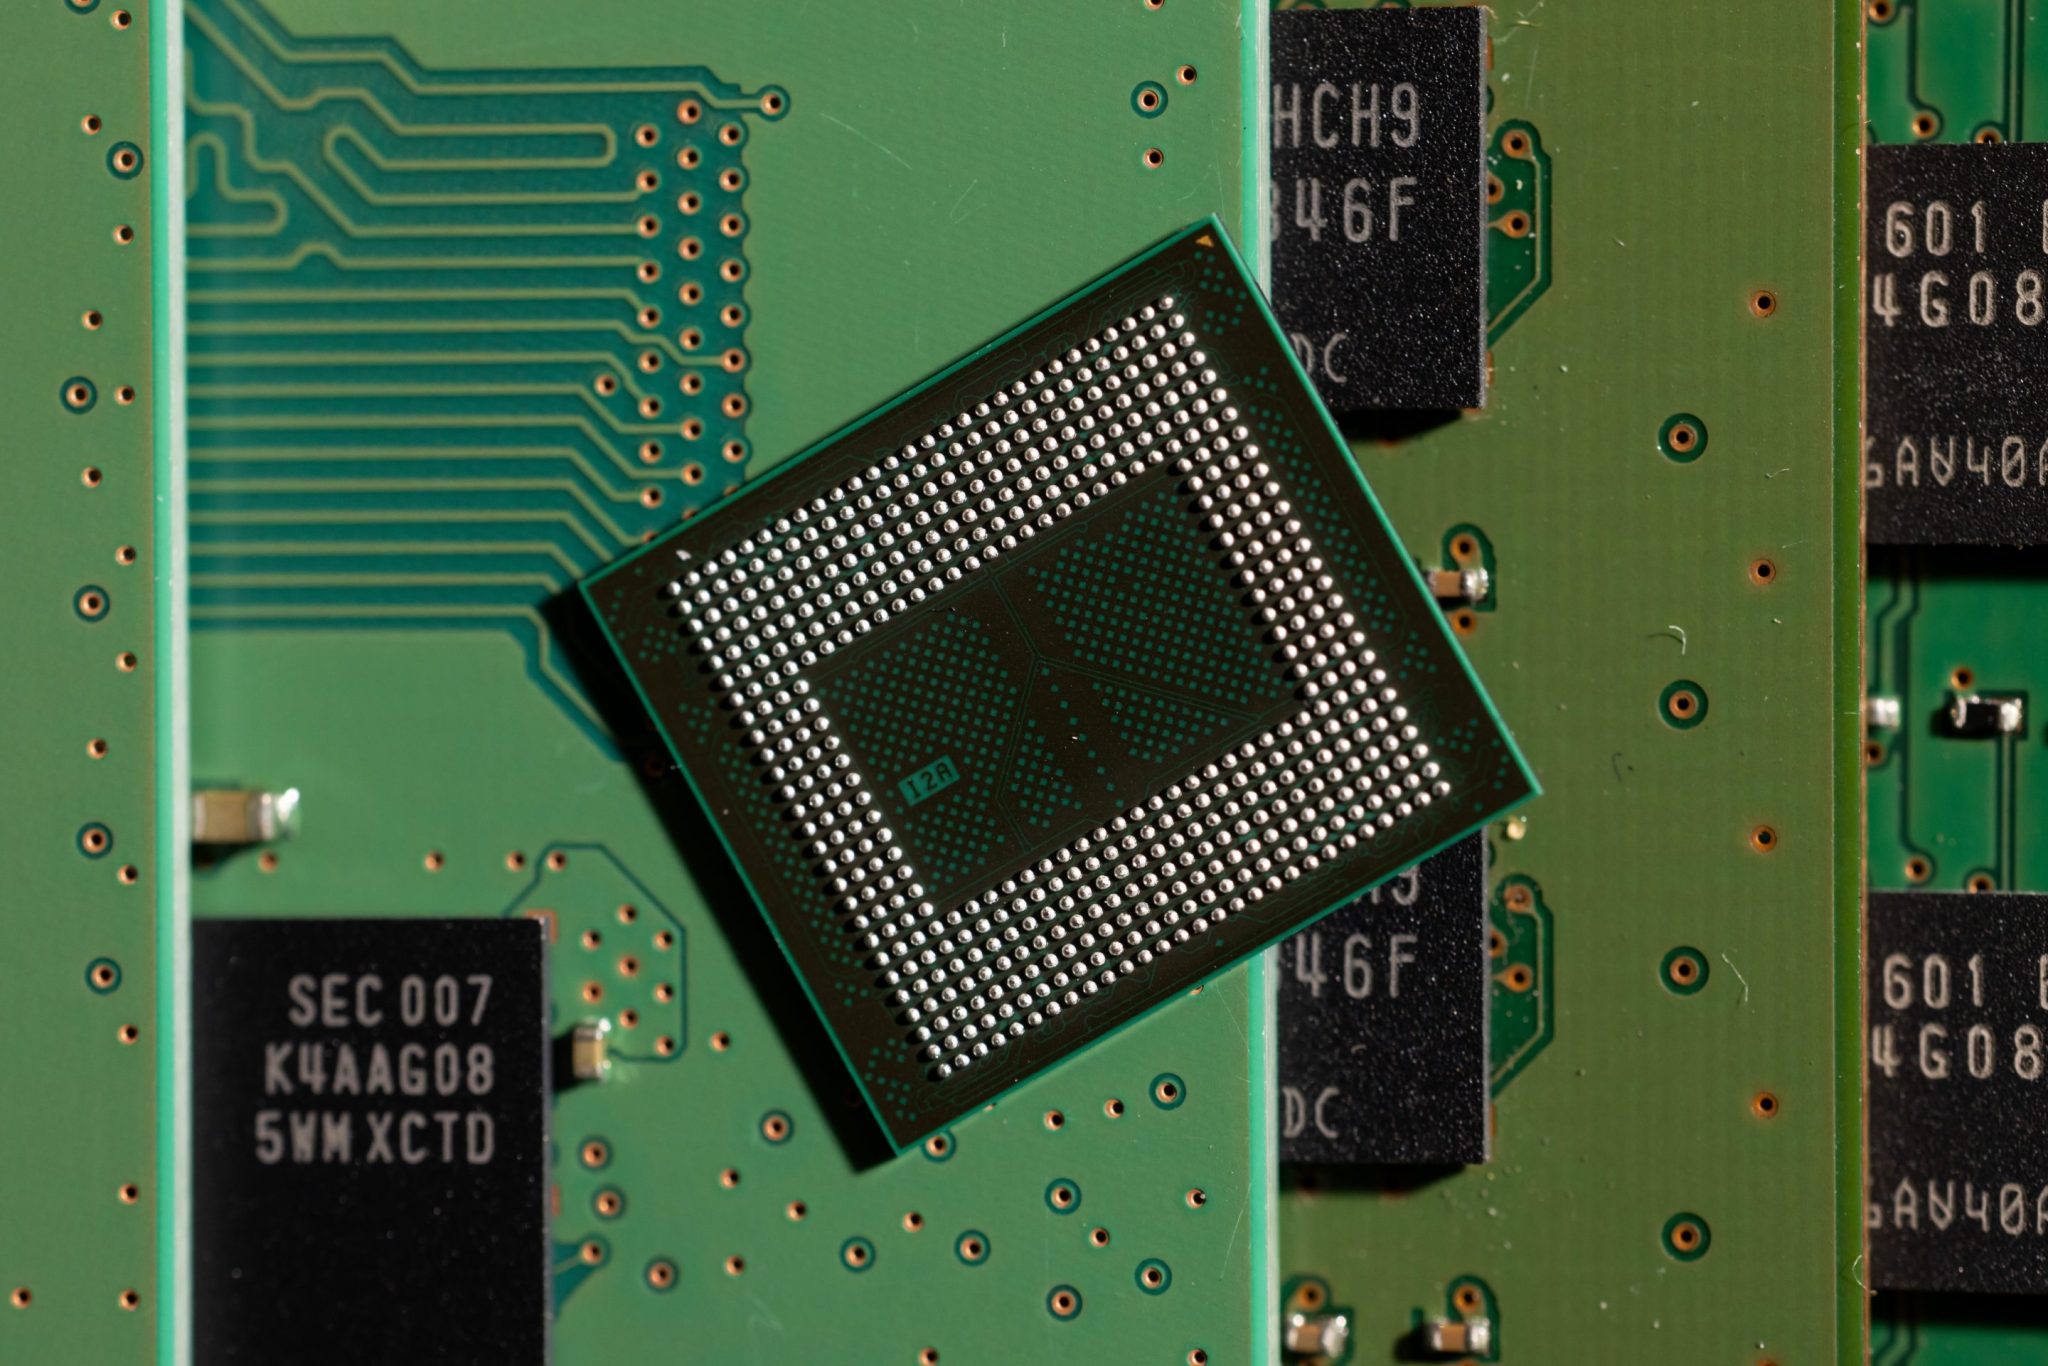 Meta and Google announce new in-house AI chips, creating a “trillion-dollar question” for Nvidia